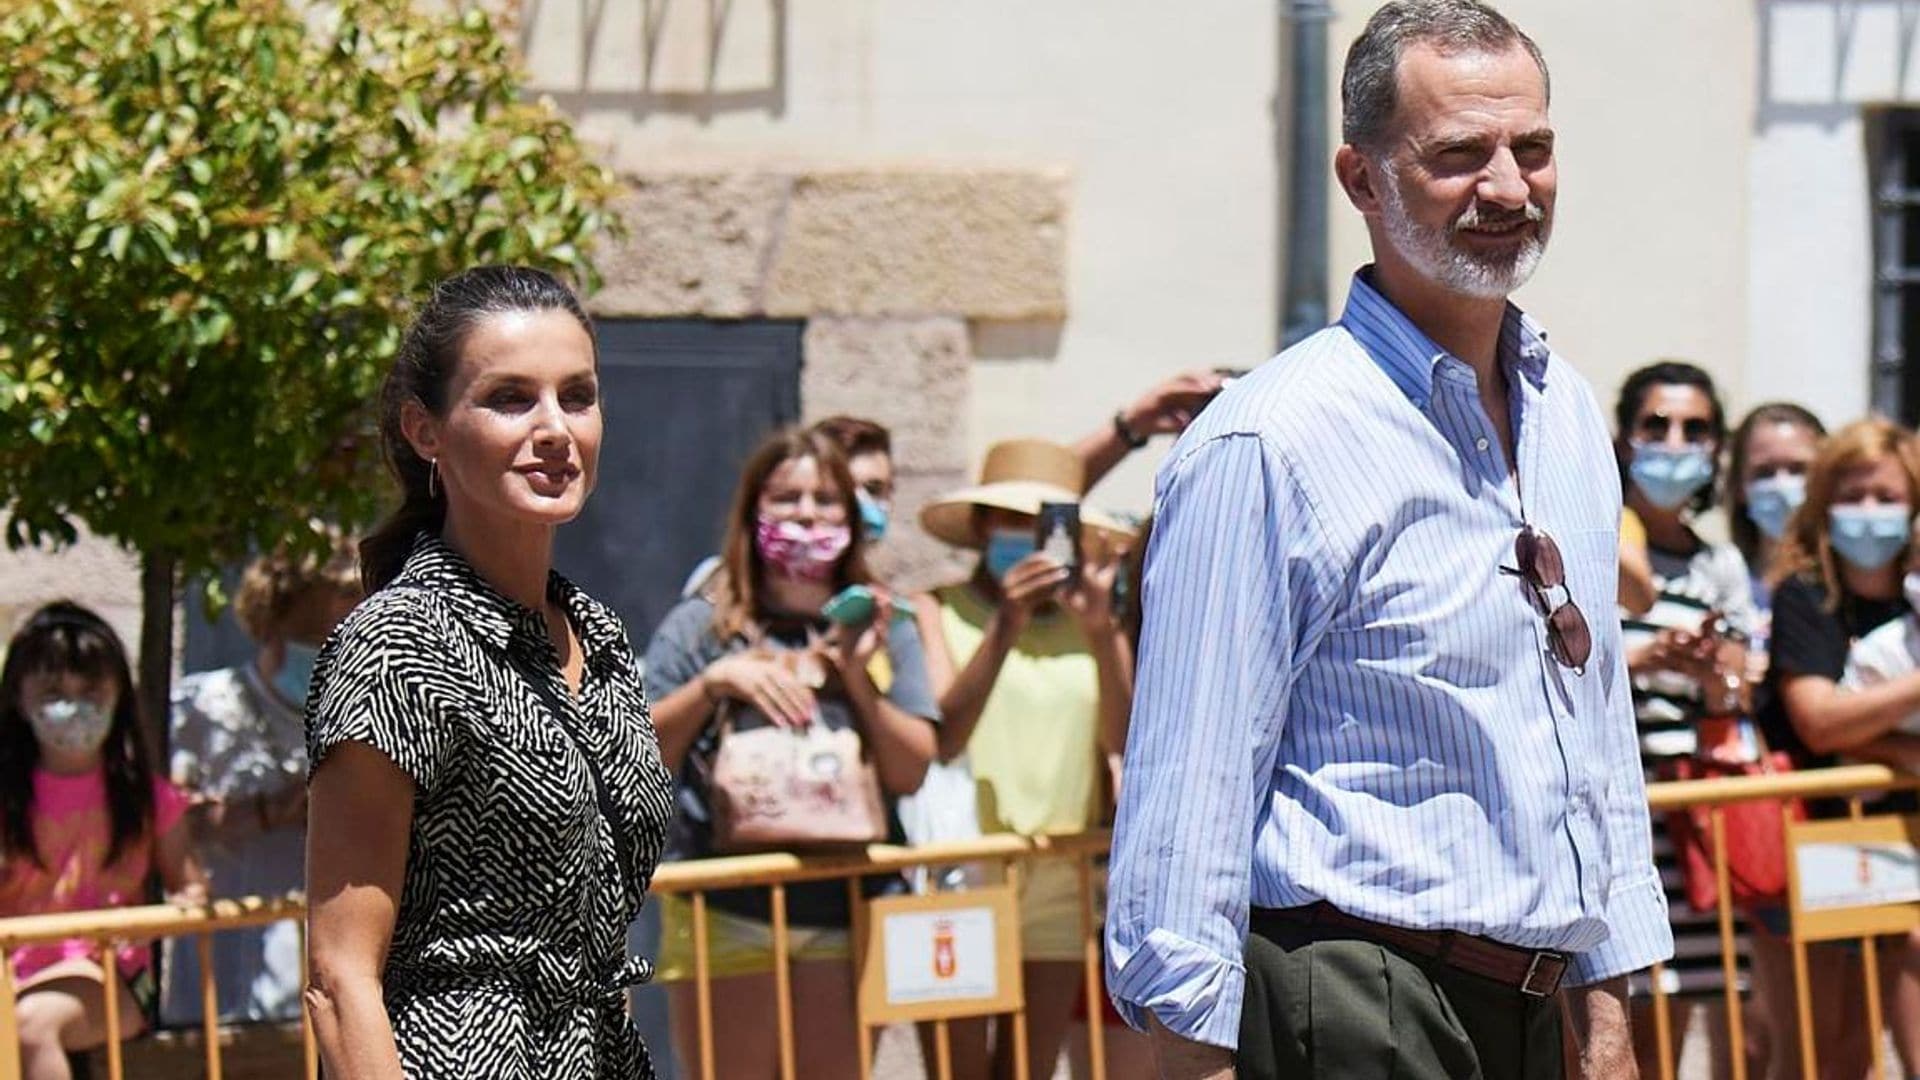 Queen Letizia’s latest summer style win costs less than $100